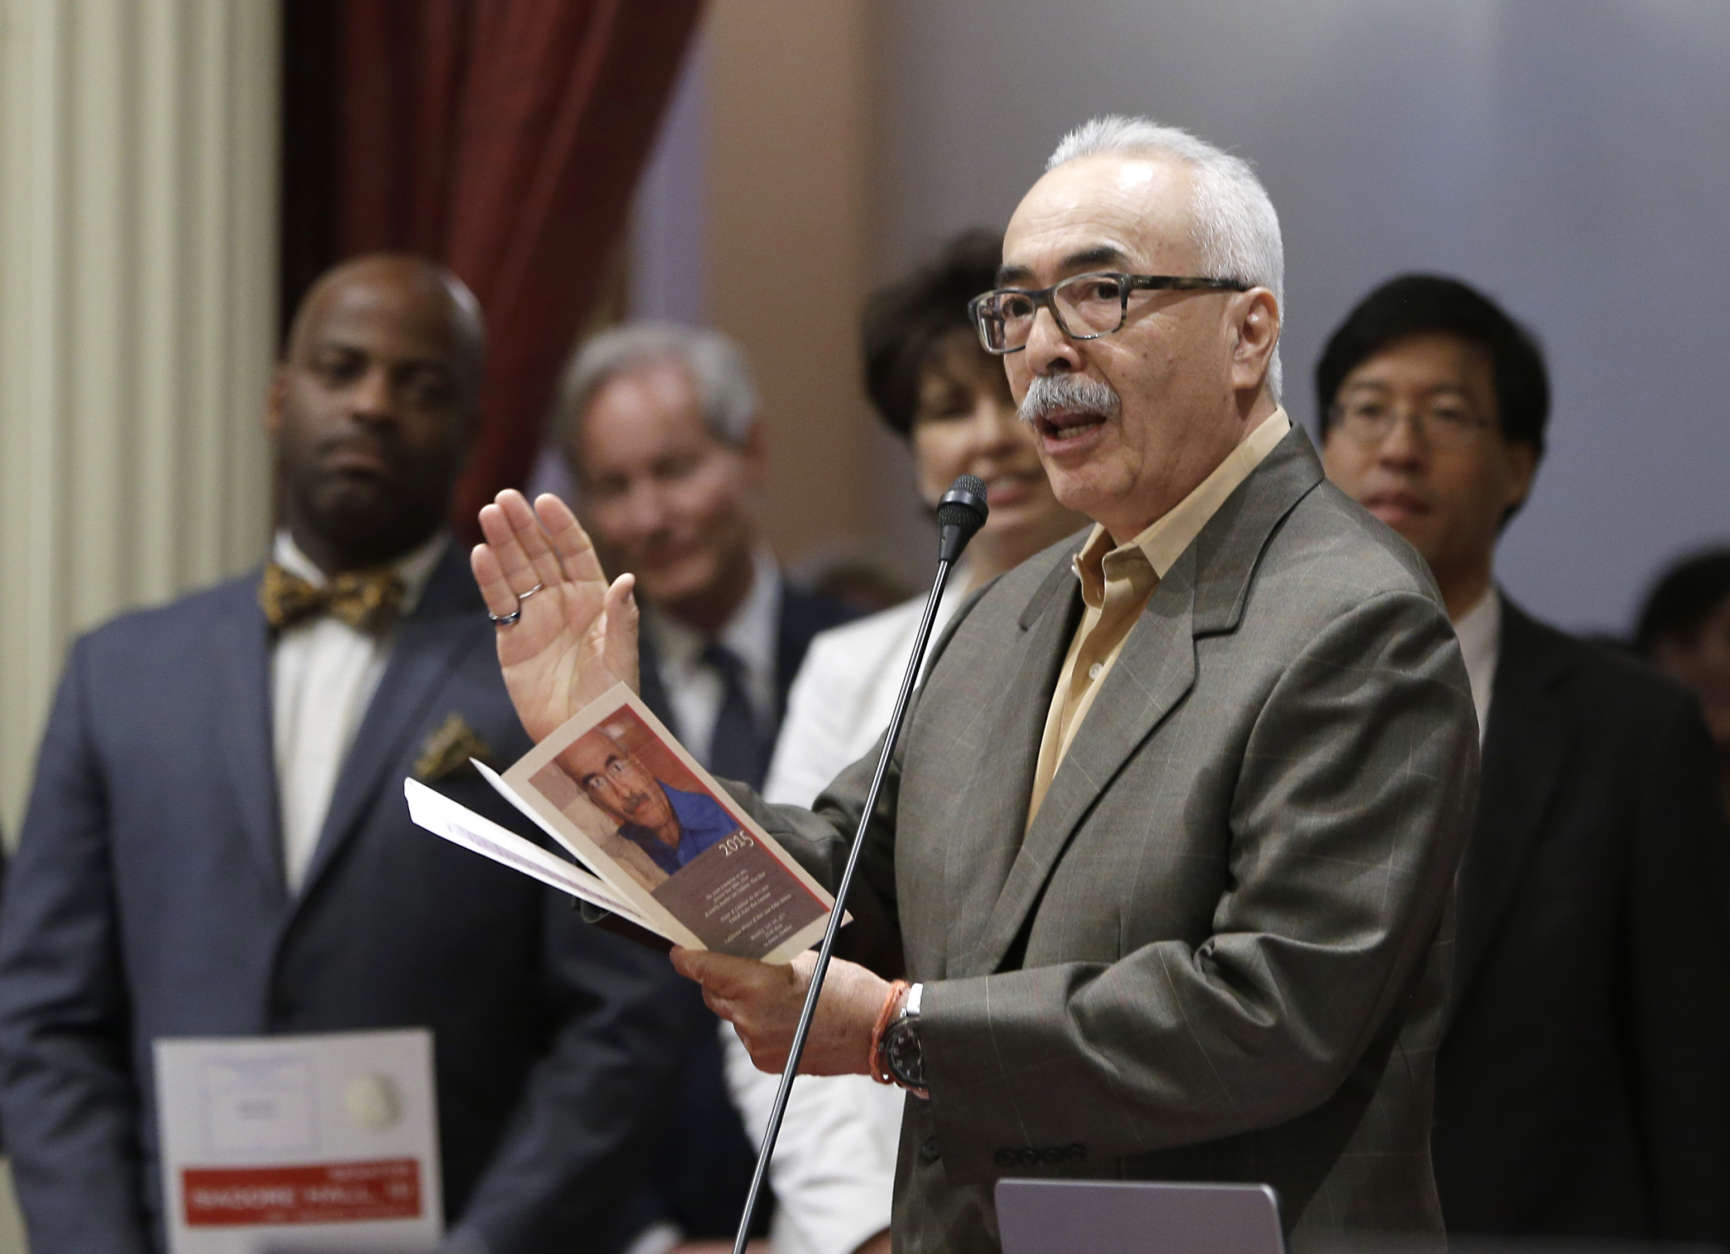 Juan Felipe Herrera, the newly appointed United States poet laureate, reads one of his poems before the California State Senate, Monday, July 6, 2015, in Sacramento,Calif. Herrera, 66, whose parents emigrated from Mexico, will be the nation's first Latino poet laureate since the position was created in 1936. (AP Photo/Rich Pedroncelli)